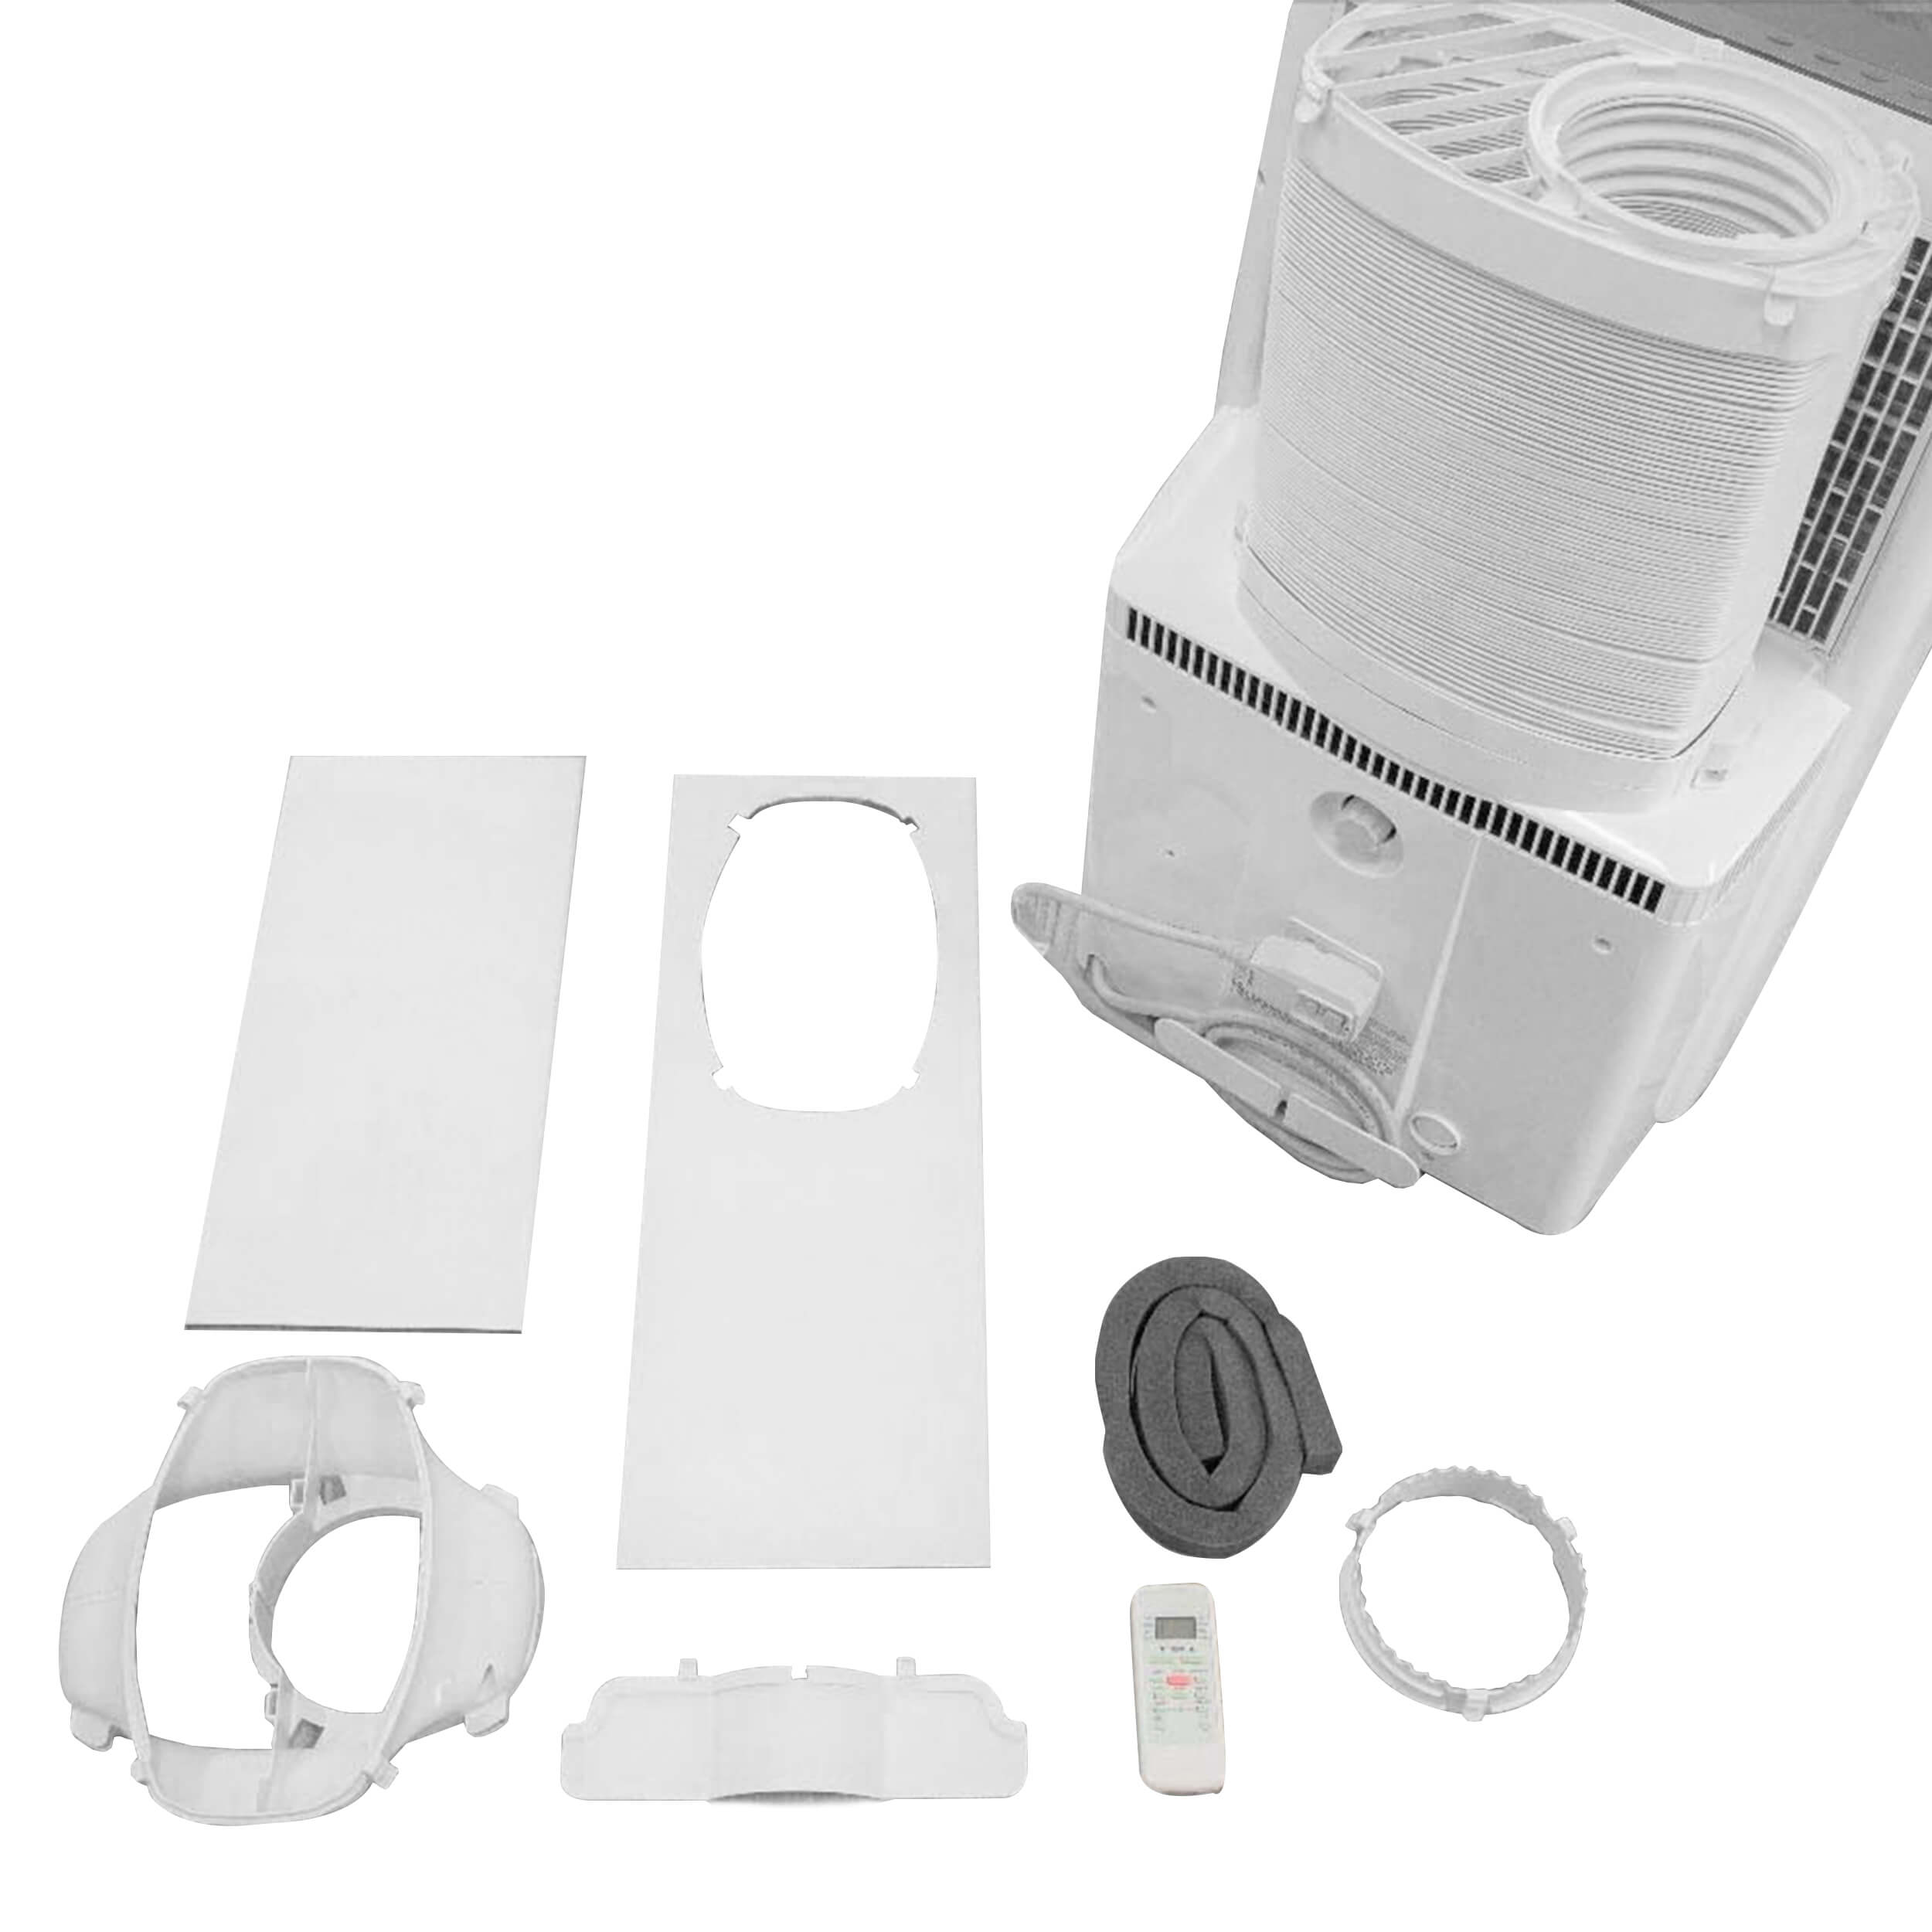 Whynter Whynter ARC-1230WNH 14,000 BTU (12,000 BTU SACC) NEX Inverter Dual Hose Cooling Portable Air Conditioner, Heater, Dehumidifier, and Fan with Smart Wi-Fi, up to 600 sq ft in White